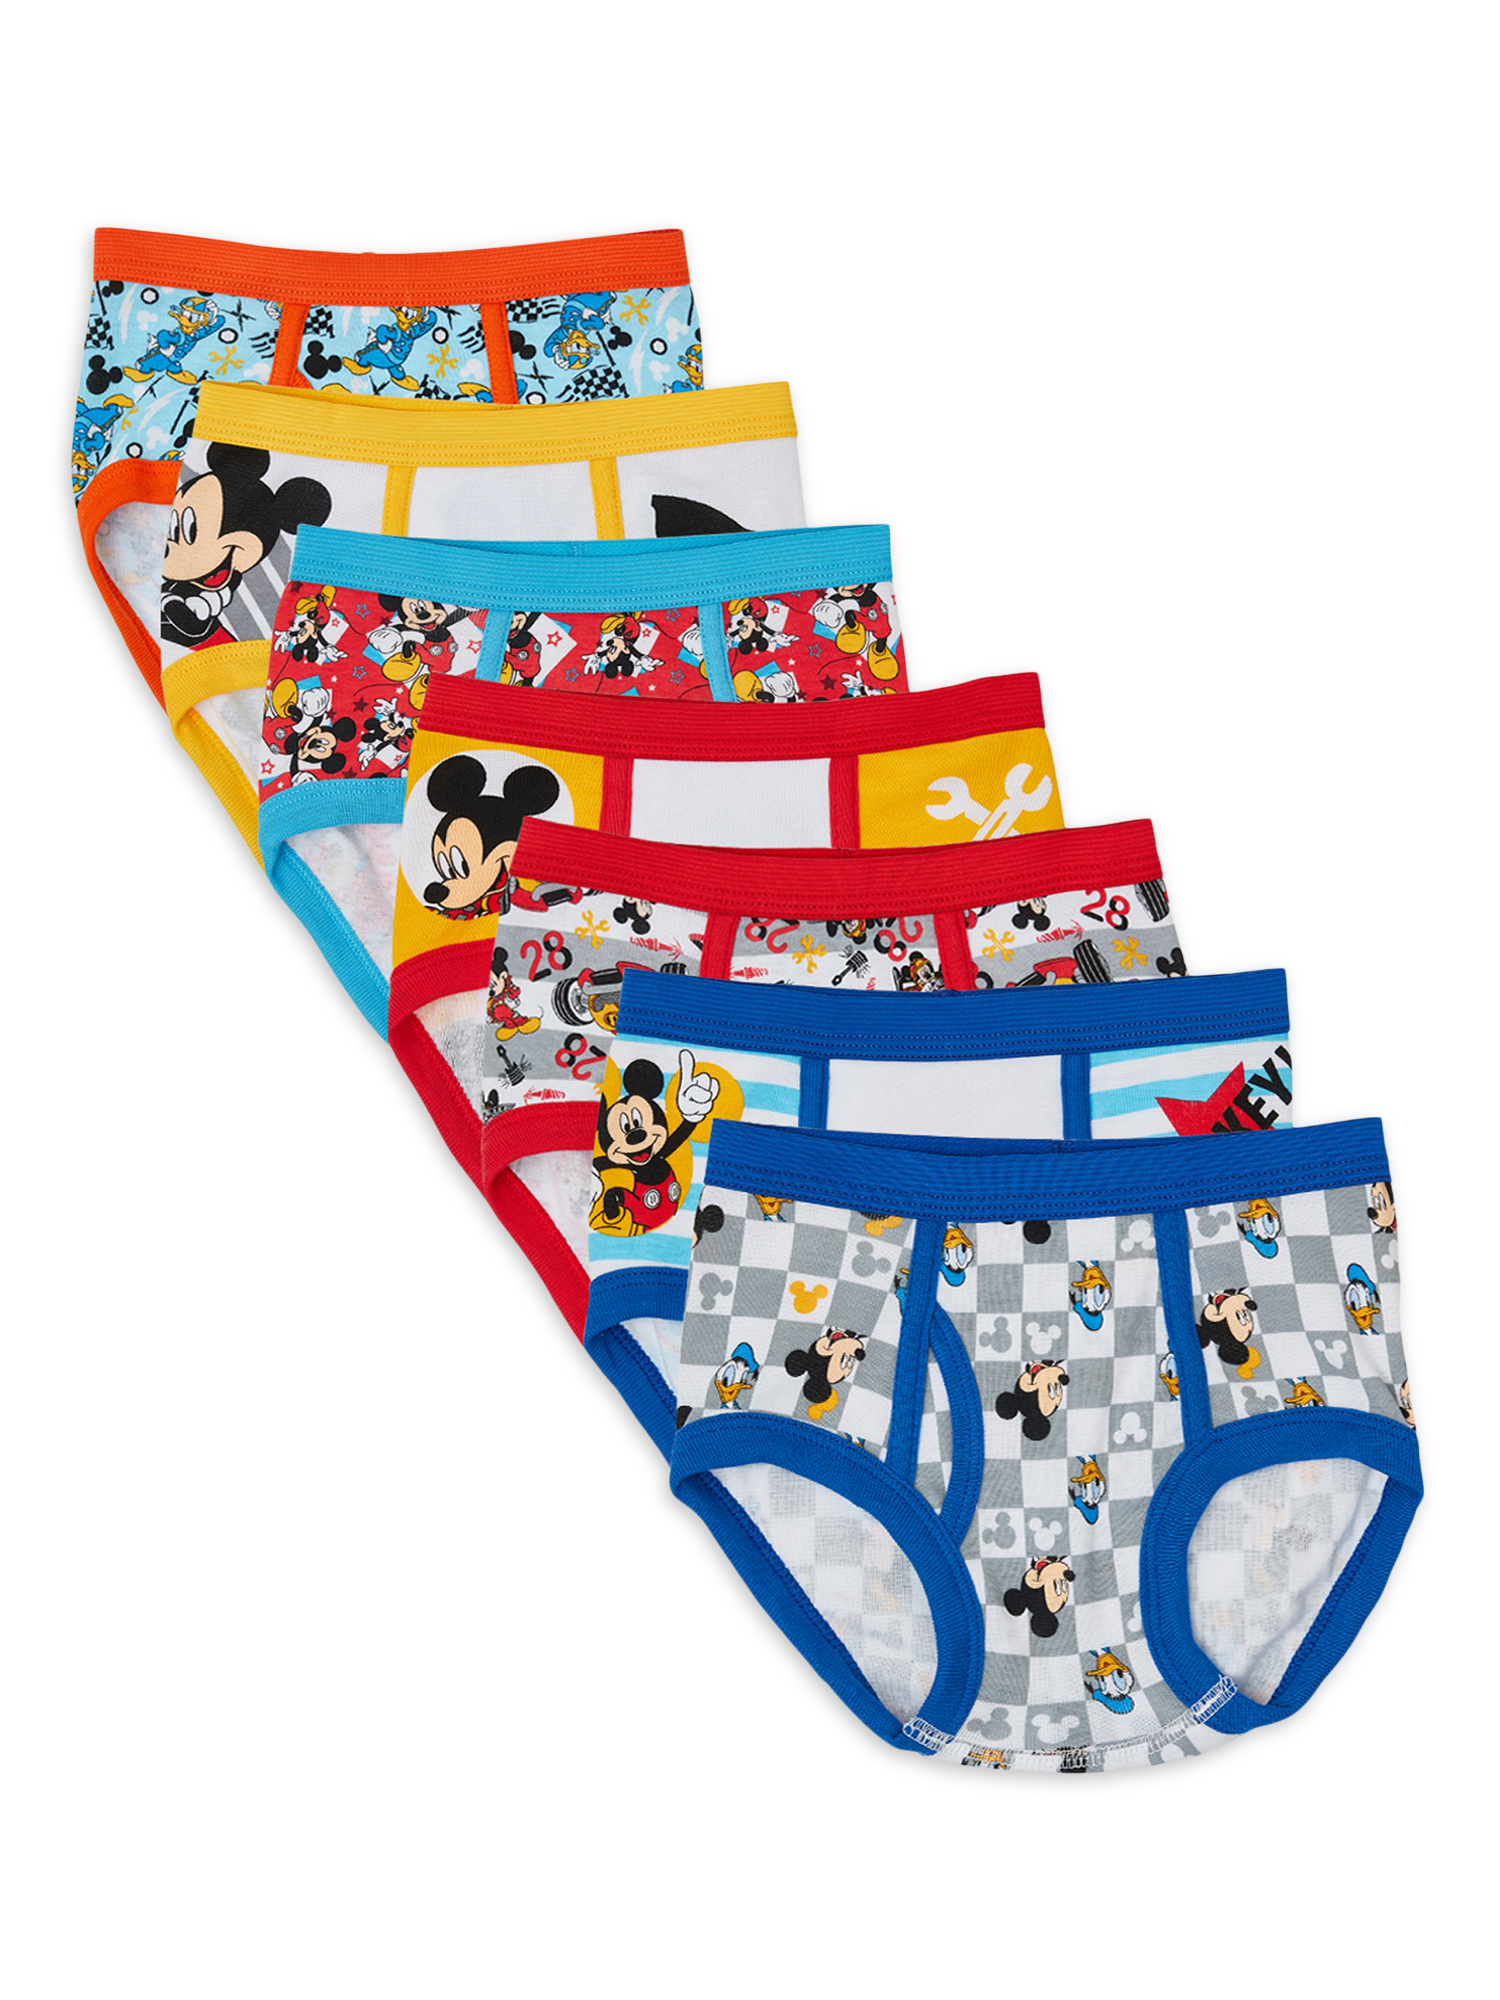 Mickey Mouse Toddler Boy Briefs, 7-Pack, Sizes 2T-4T - image 1 of 3